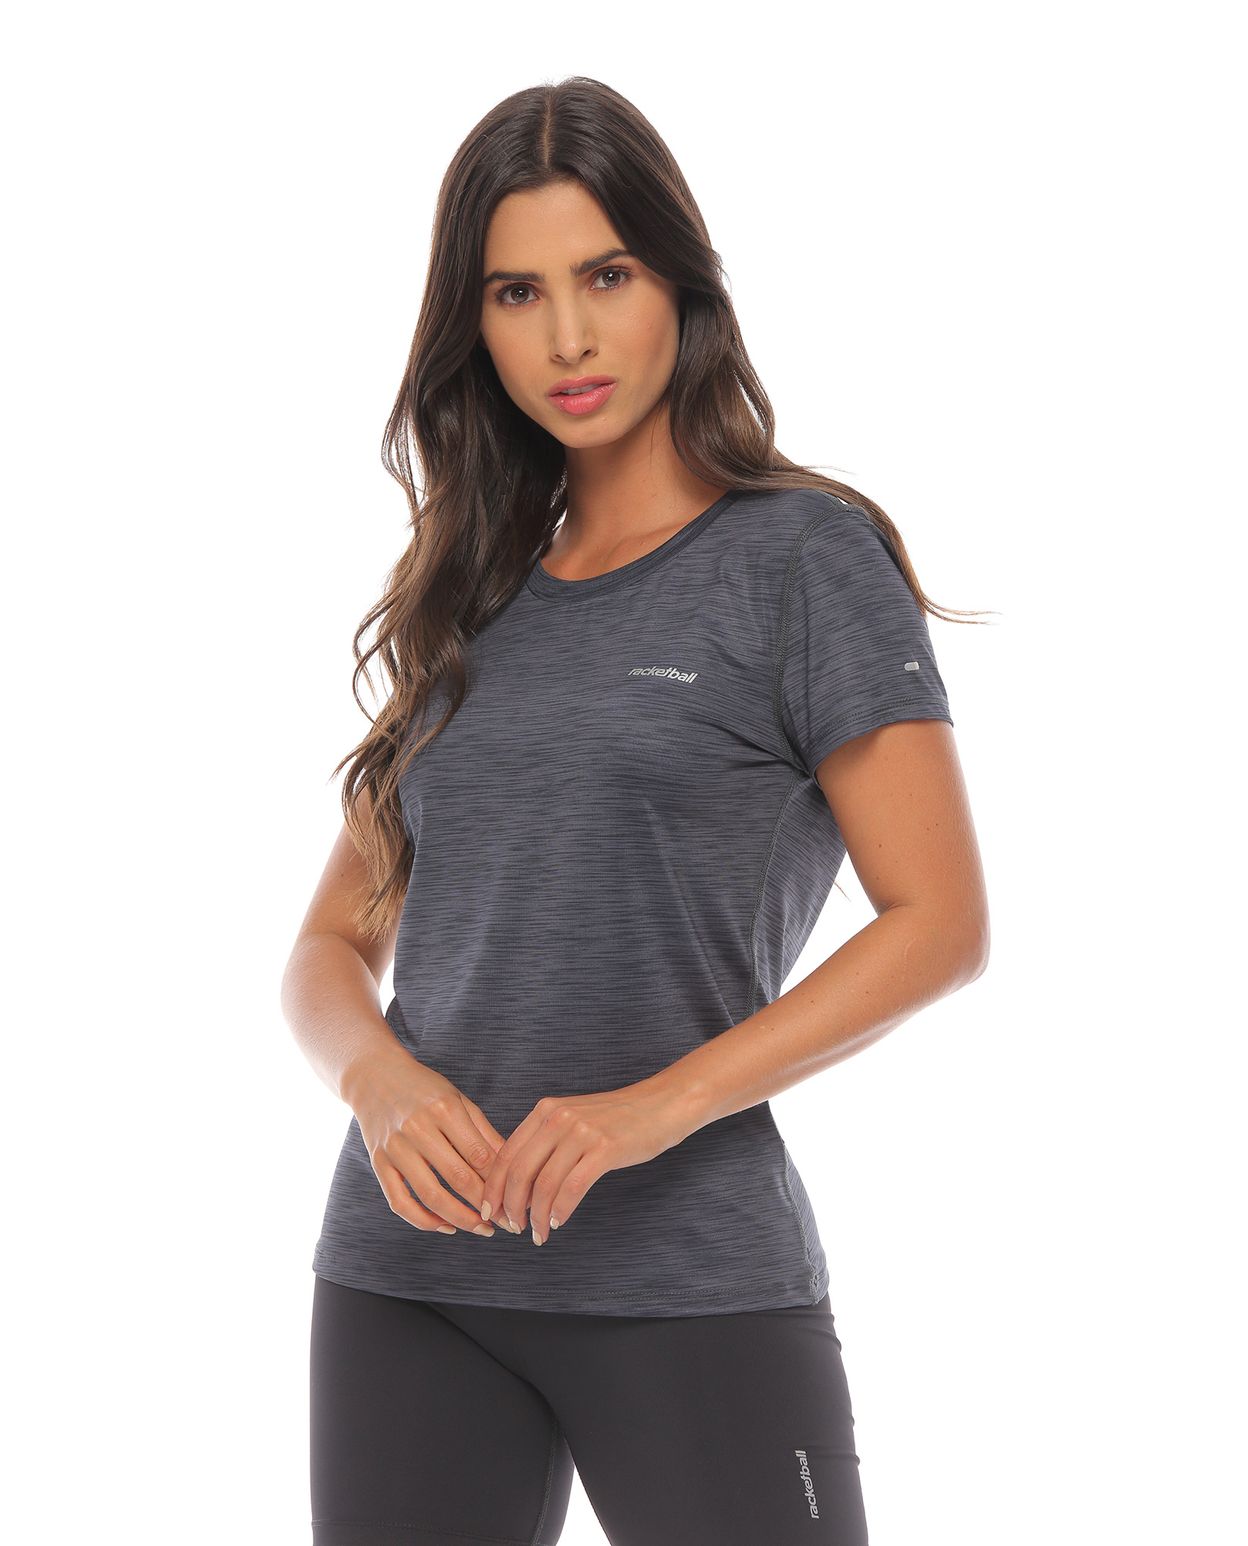 Camiseta deportiva para mujer, color gris oscuro - movil